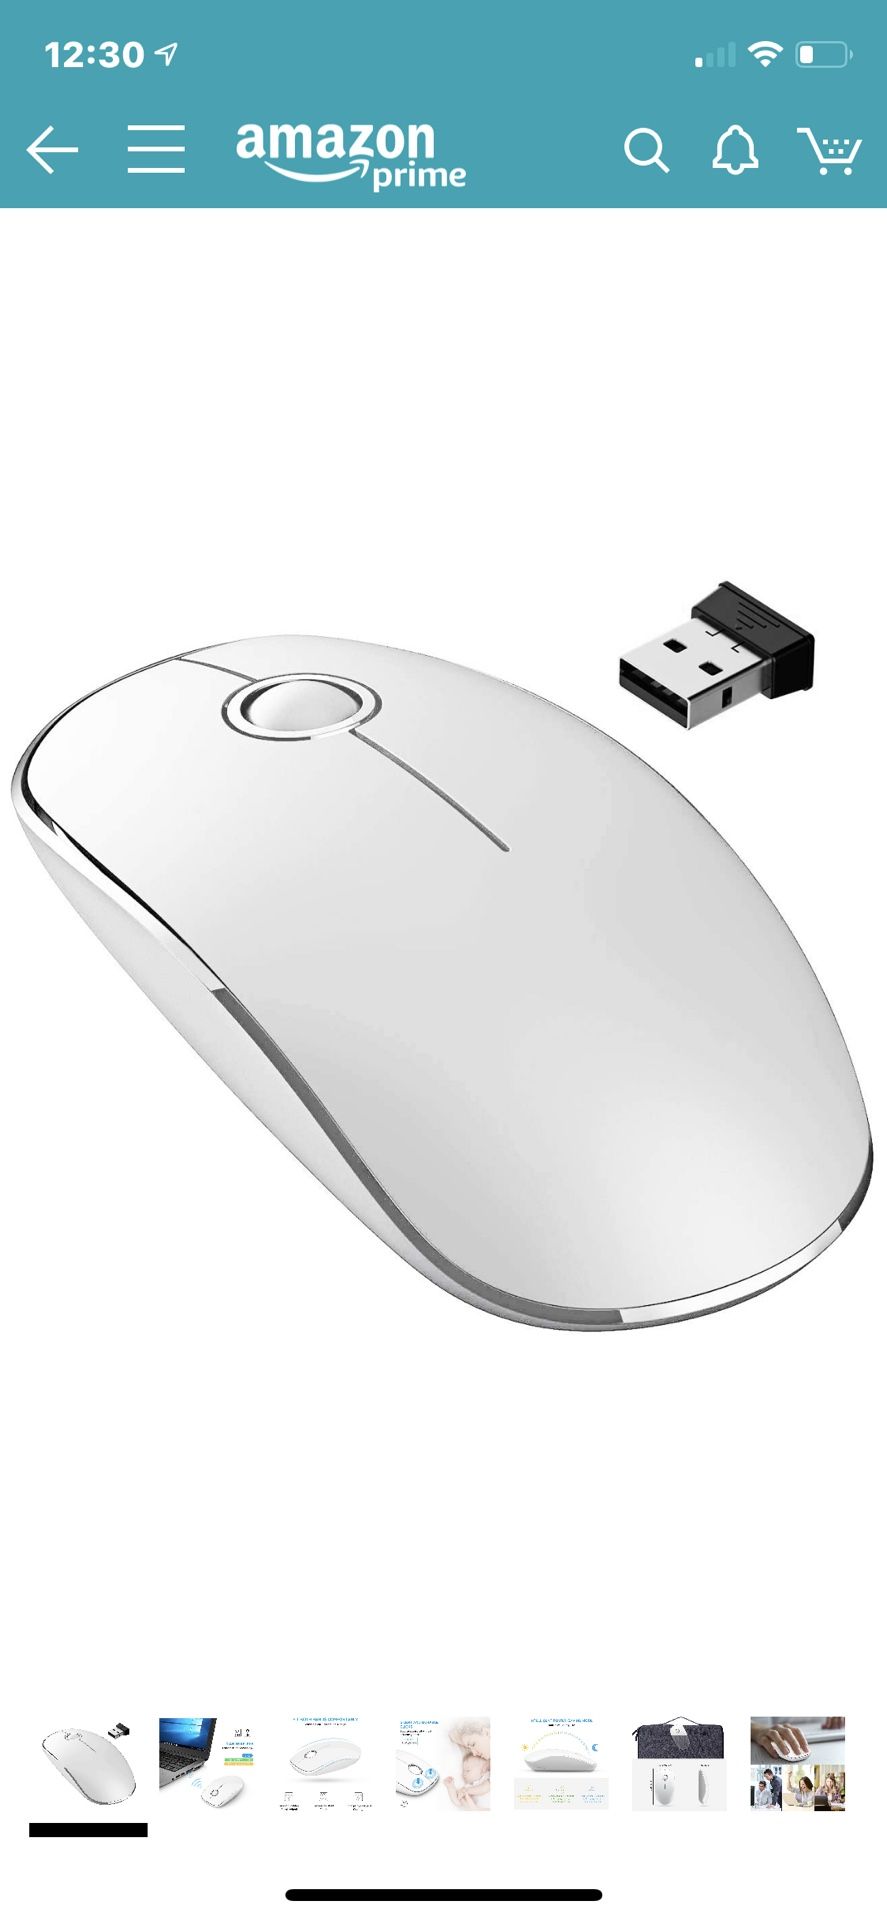 2.4G Slim Wireless Mouse with Nano Receiver, Noiseless and Silent Click with 1600 DPI for PC, Laptop, Tablet, Computer, White and Silver